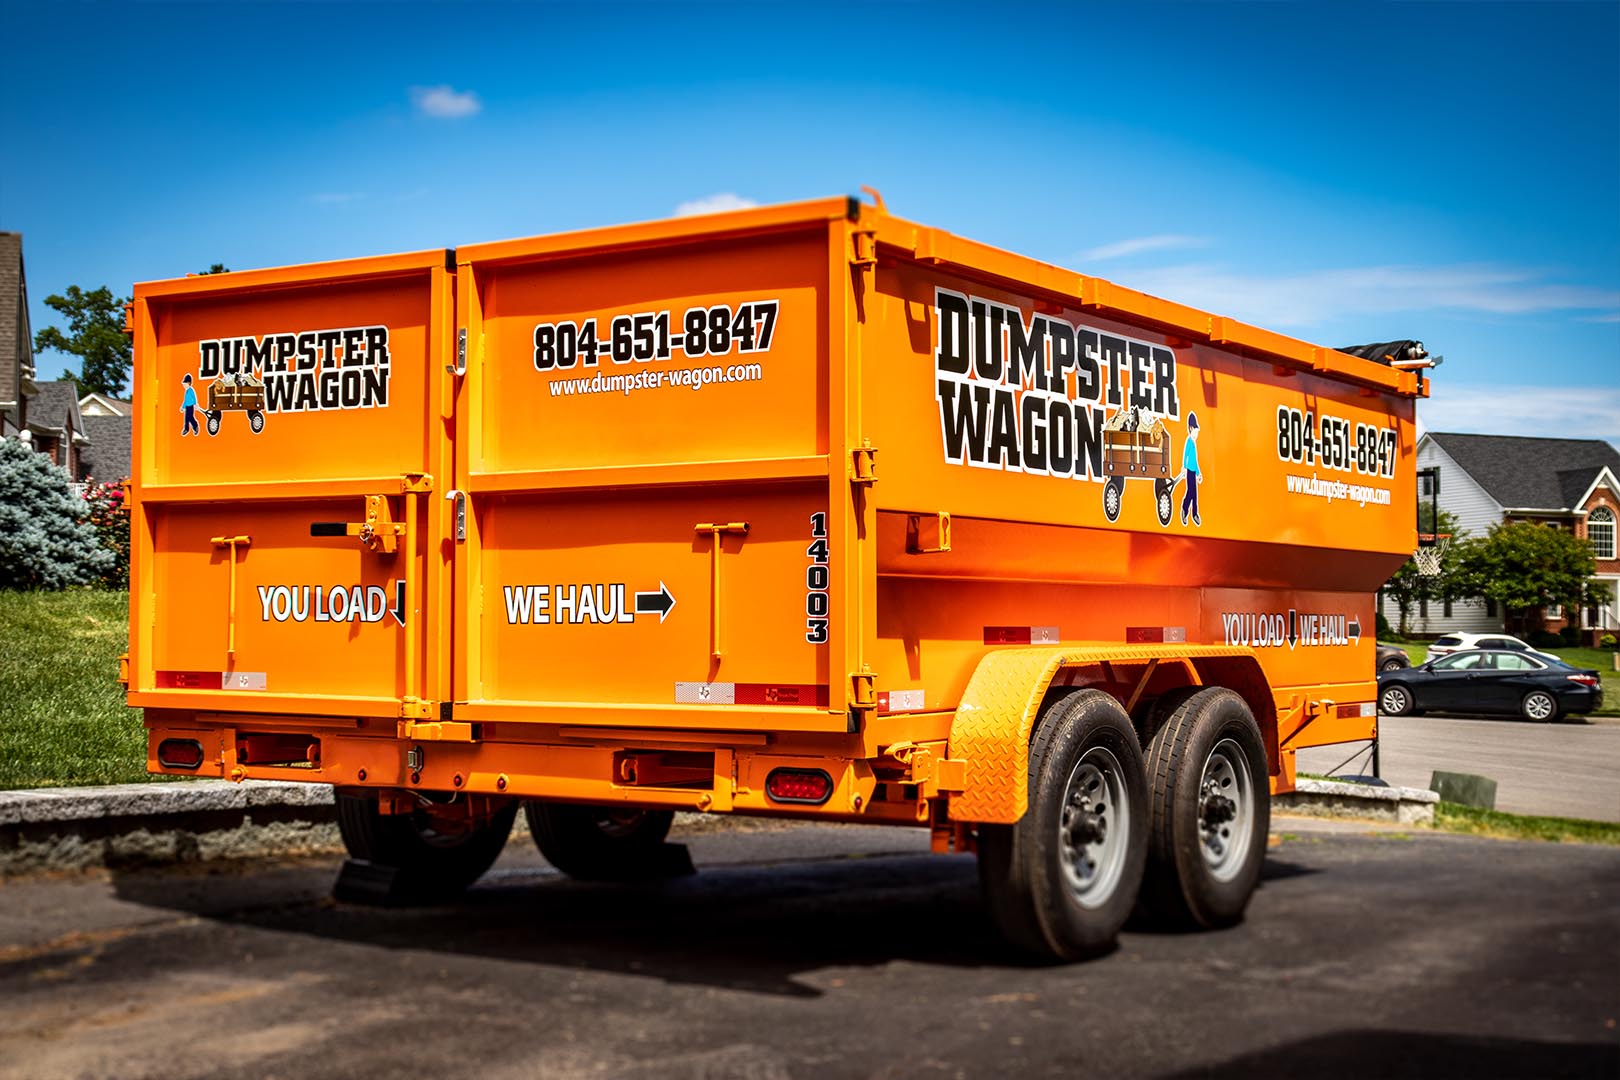 Residential, commercial and construction dumpster rental in Richmond, Virginia